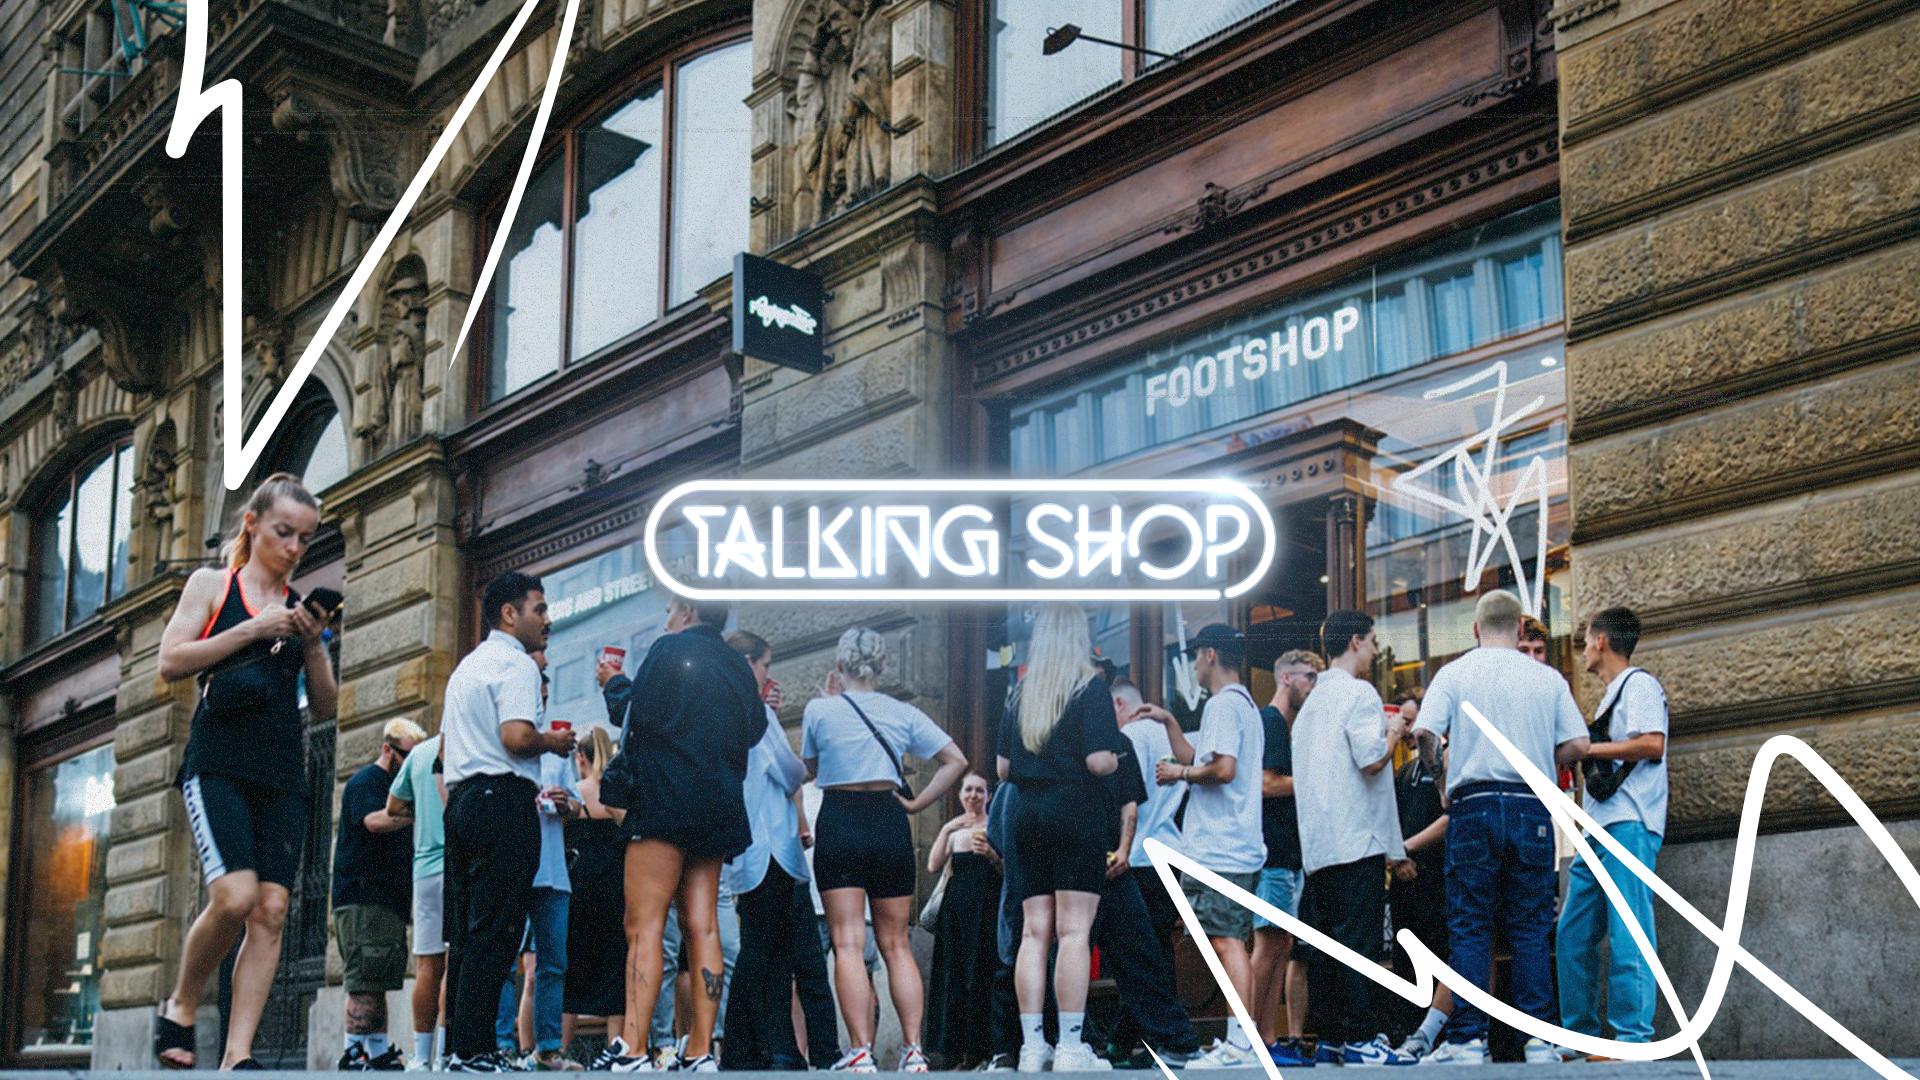 A milestone! Footshop is officially part of the Nike Talking Shop series in the SNKRS app